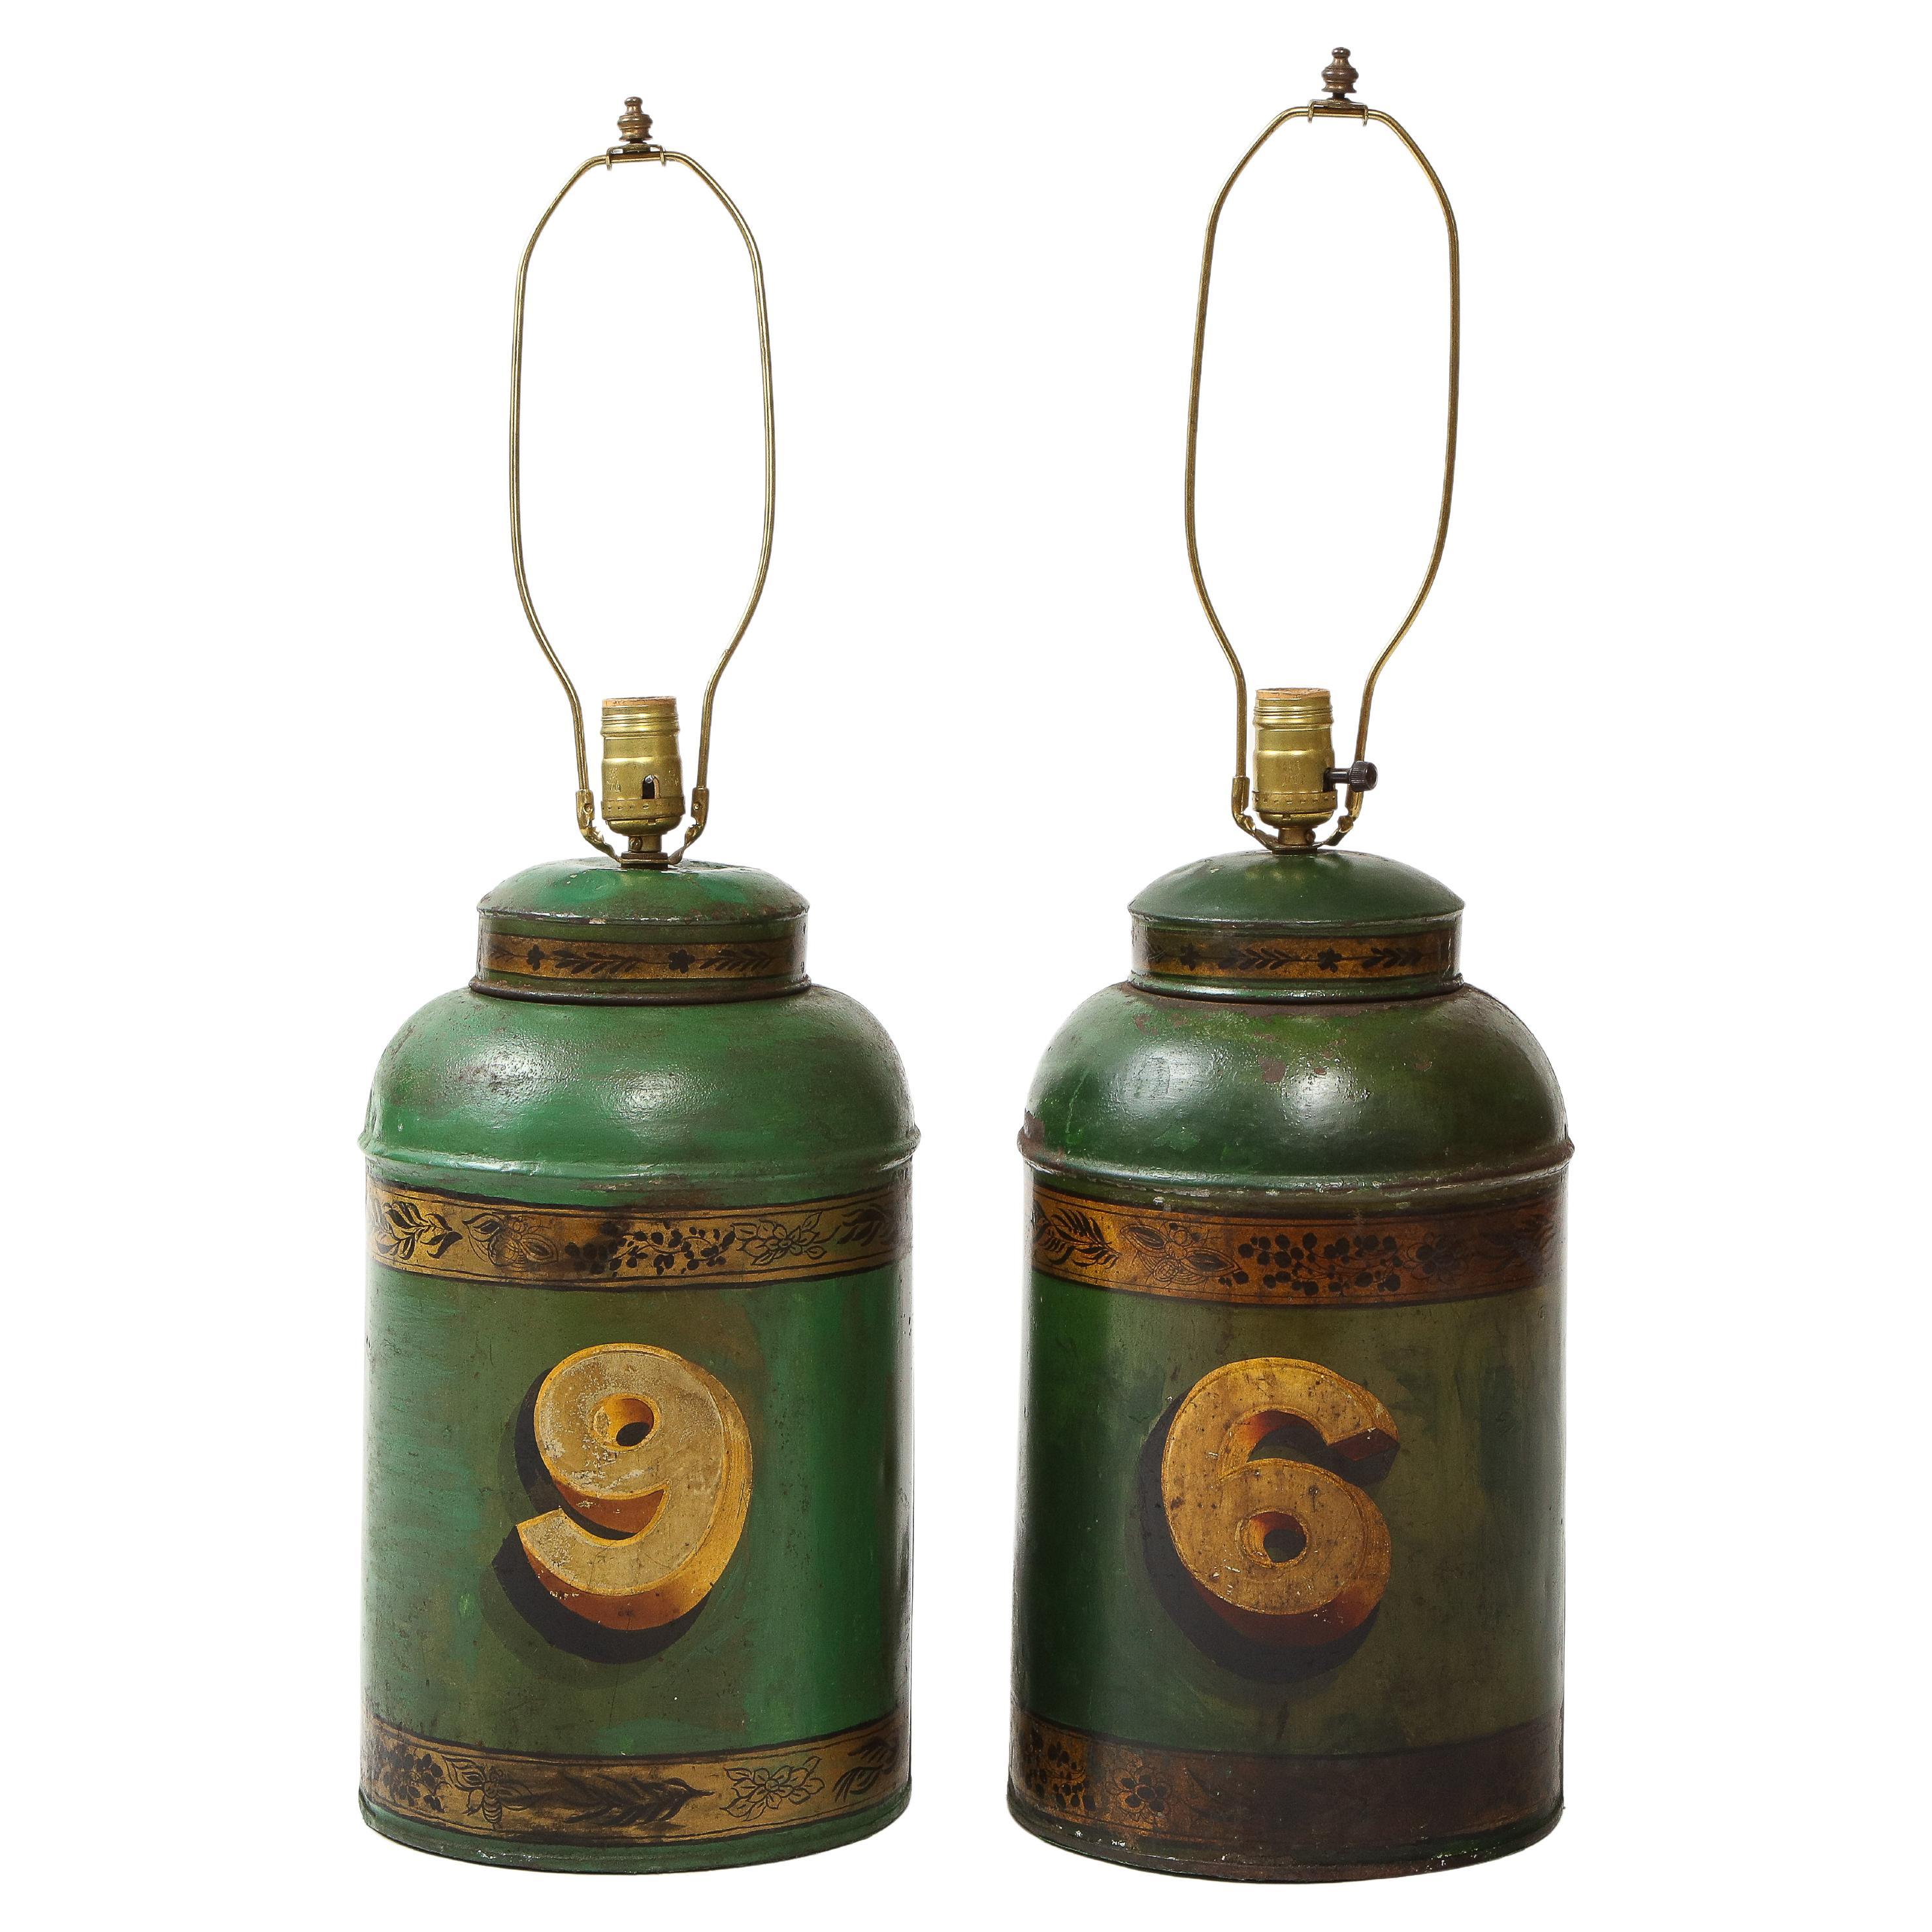 Pair of English Green and Gilt Tôle Tea Canister Lamps